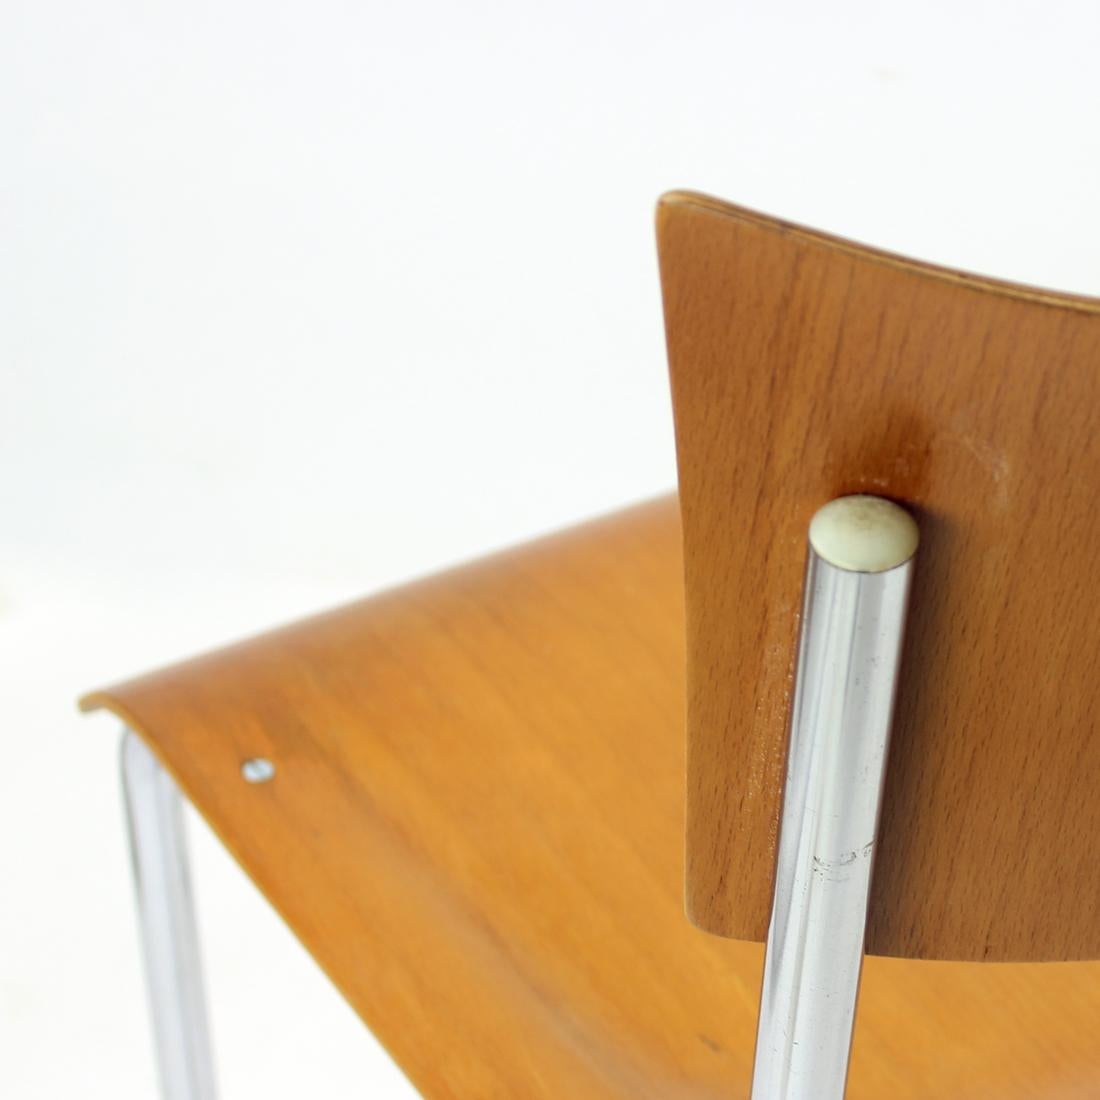 Stainless Steel Tubular Chair with Molded Plywood, Mart Stam Design for Thonet, 1950s